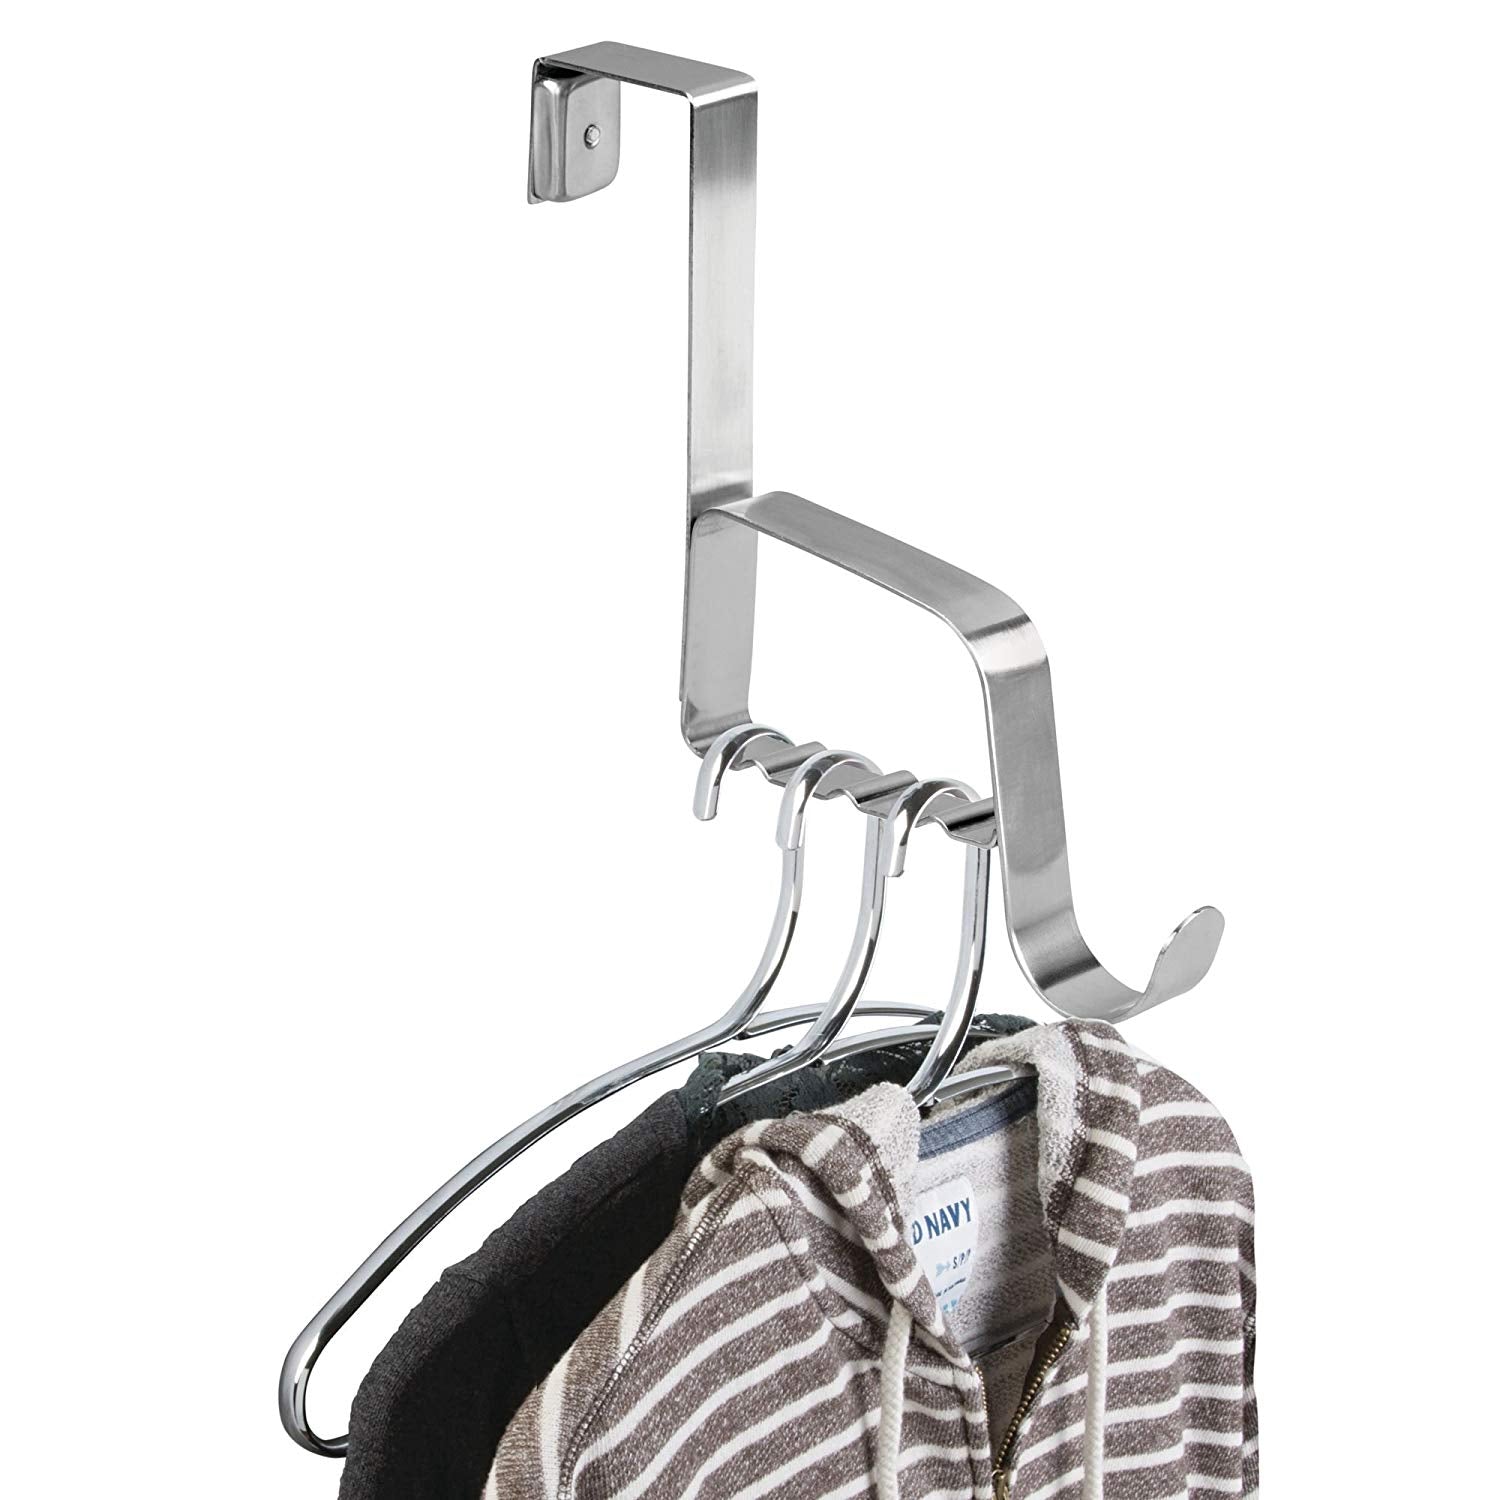 mDesign Over the Door Valet Hook for Coats, Hats, Robes, Towels - 1 Hook, Brushed Stainless Steel